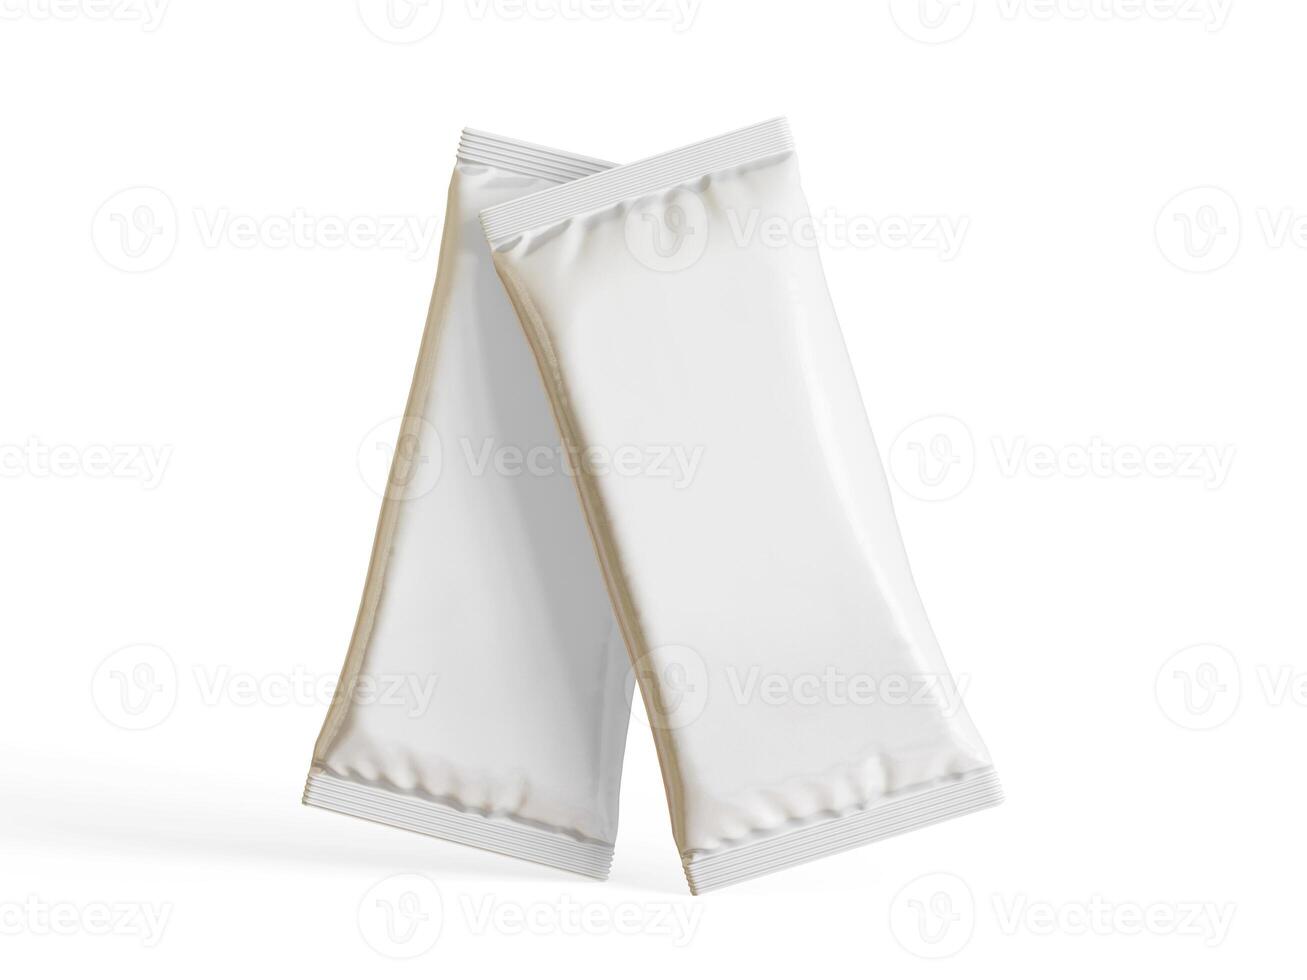 Snack bar packaging white color realistic texture 3D rendered photo